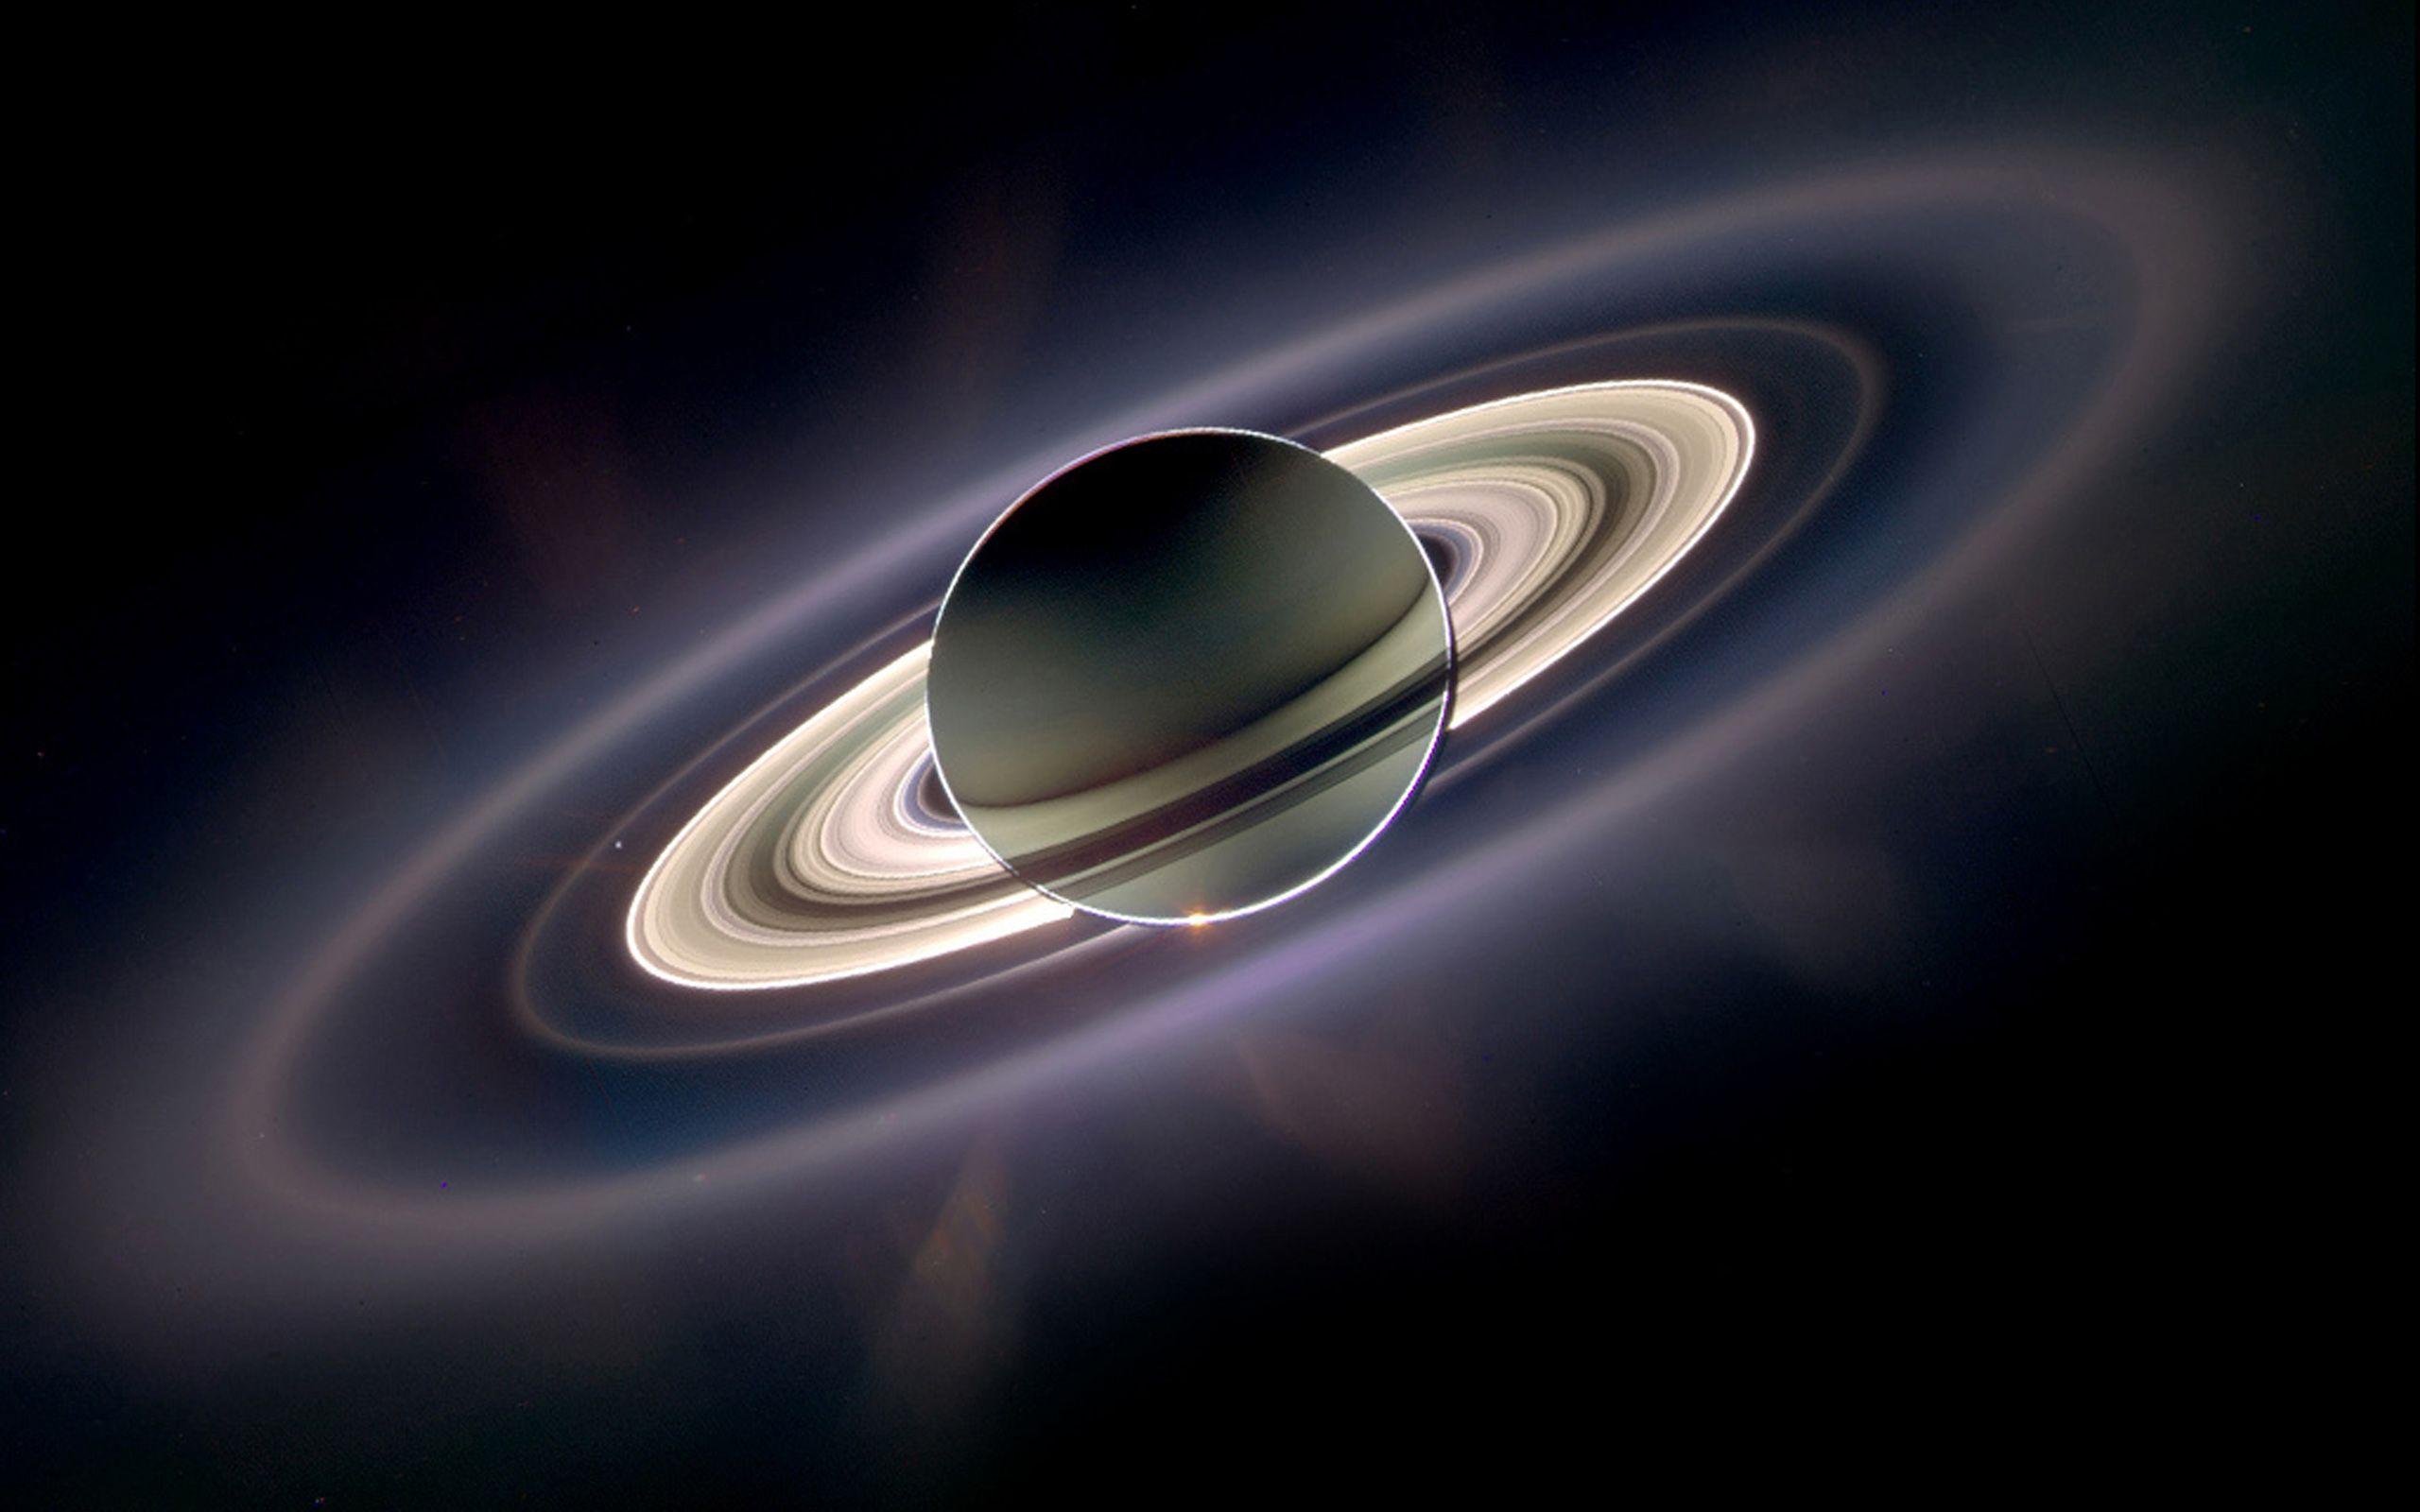 Saturn Hd Wallpapers Top Free Saturn Hd Backgrounds Wallpaperaccess 7611